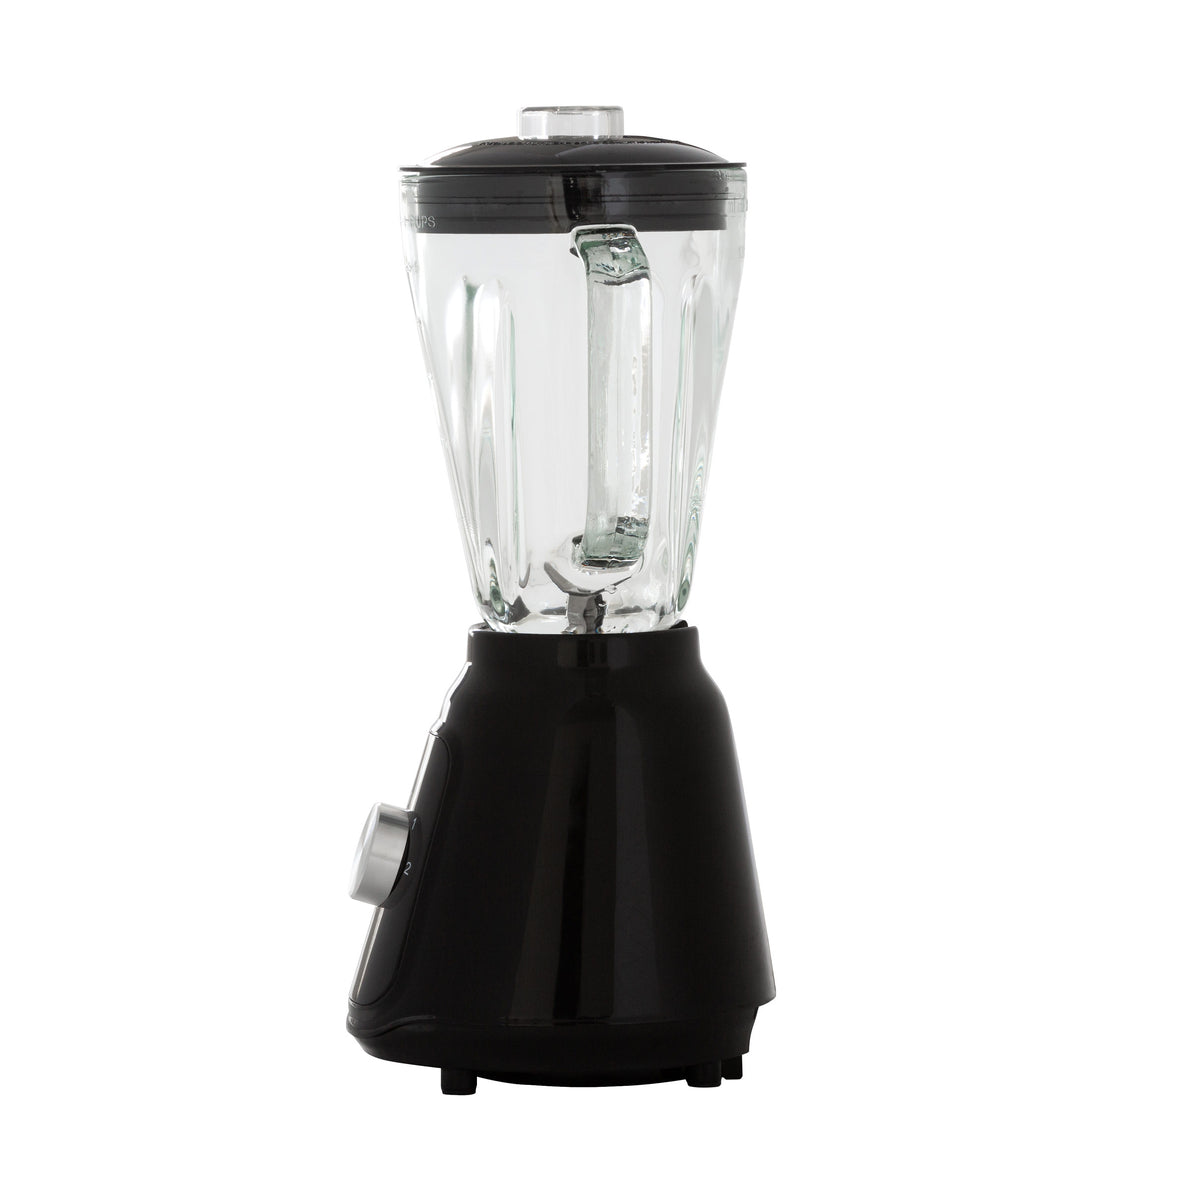 Side view of the Black 1.5 Litre Table Blender with glass jug.